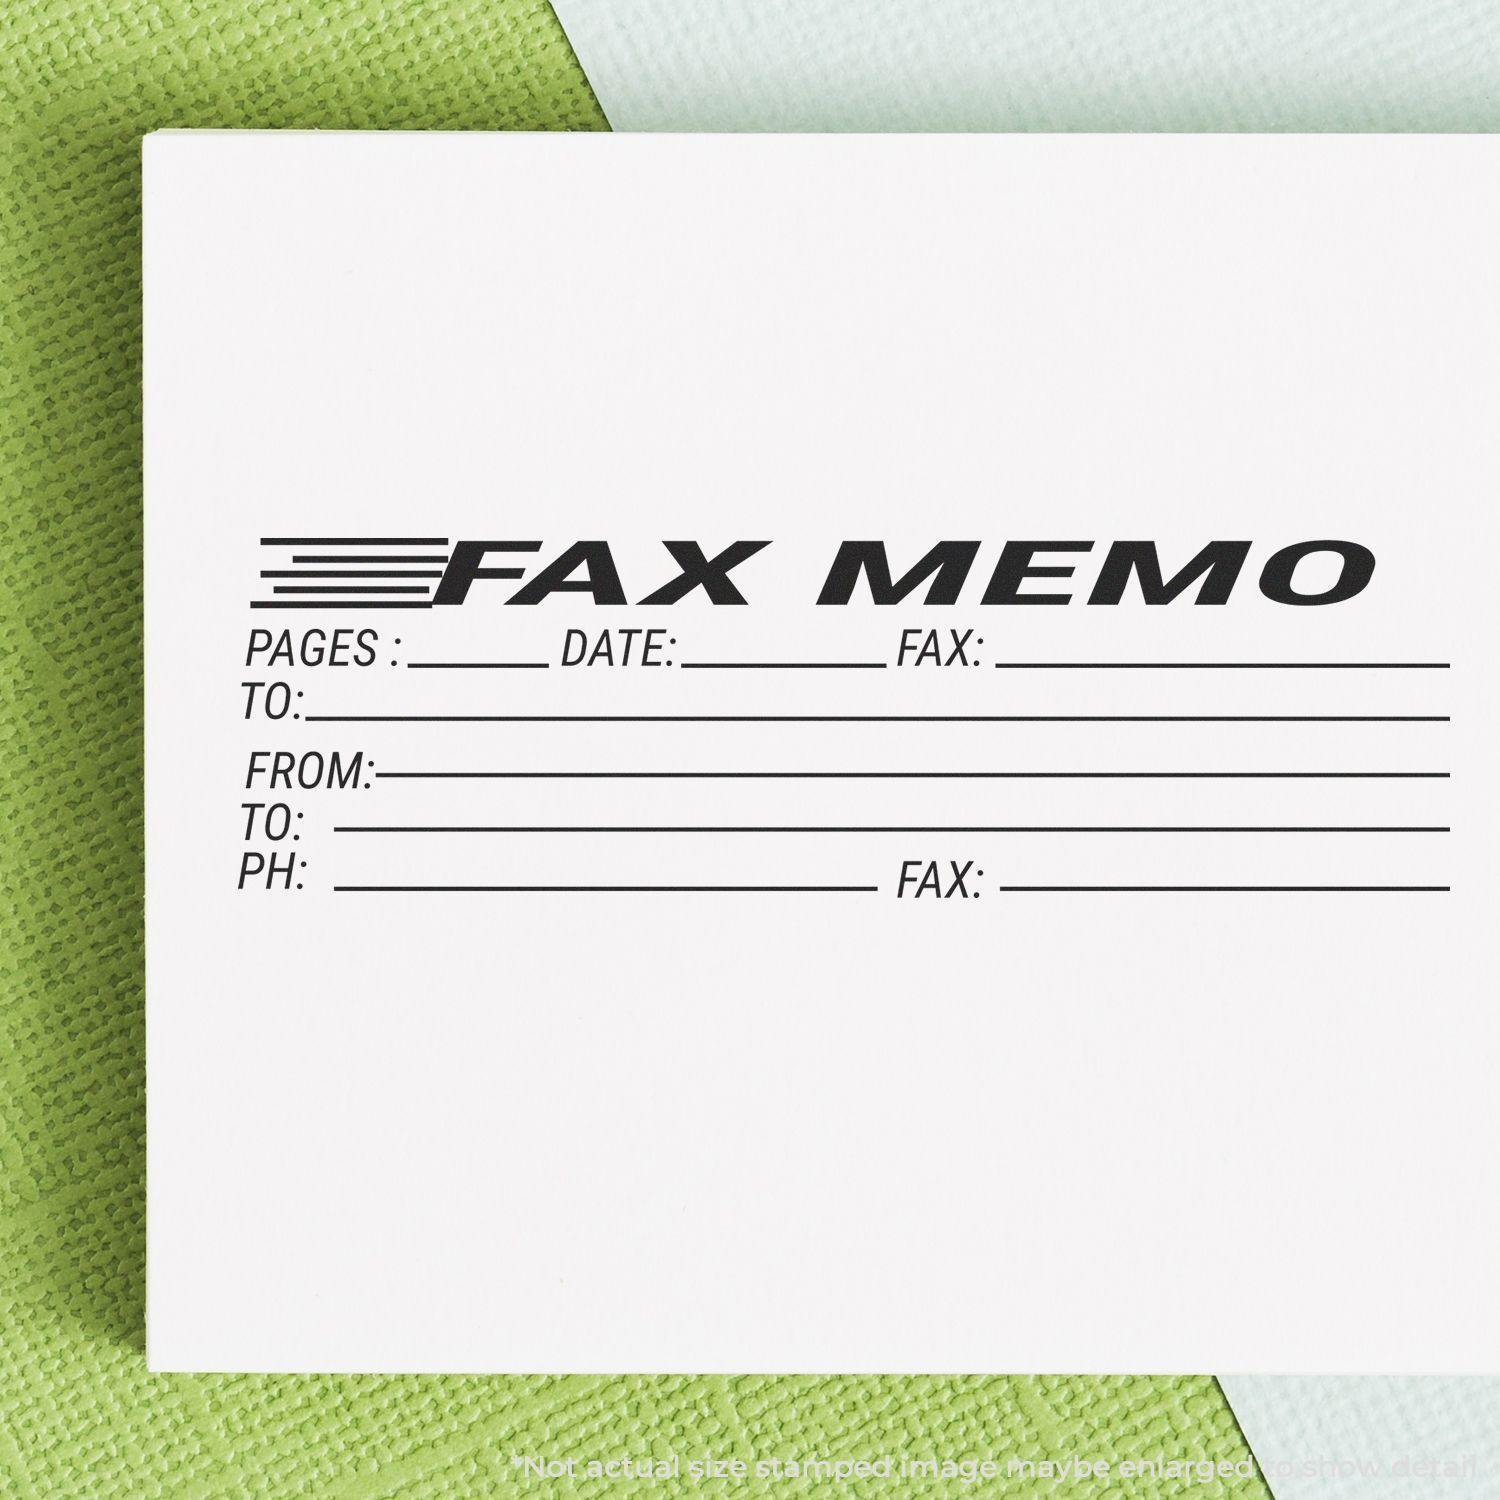 In Use Large Pre-Inked Fax Memo Stamp Image